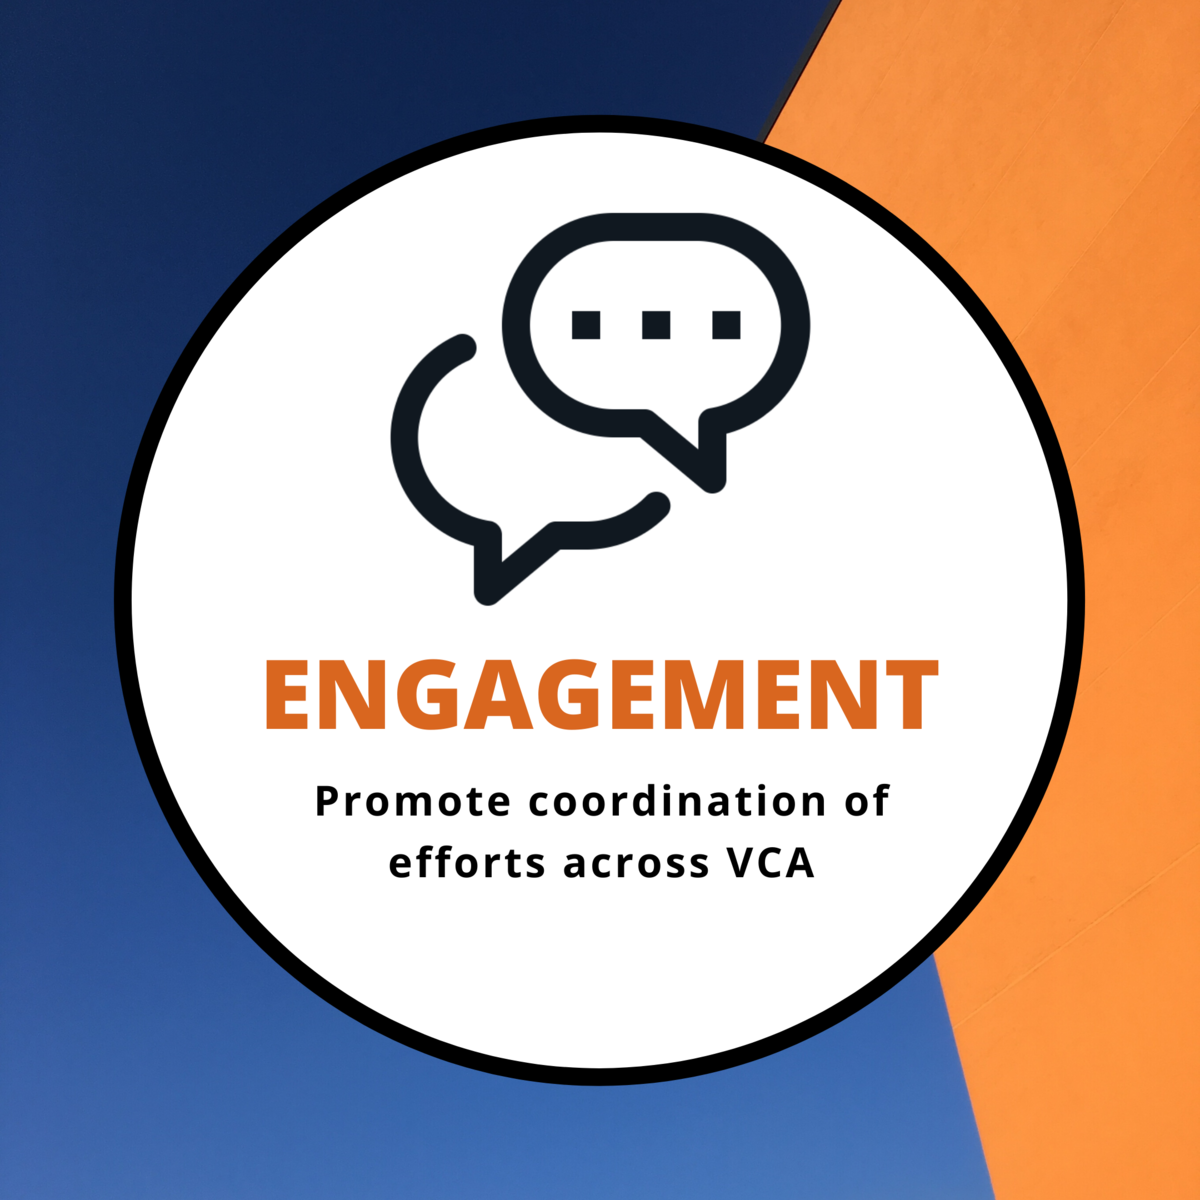 Engagement: Promote coordination of efforts across VCA